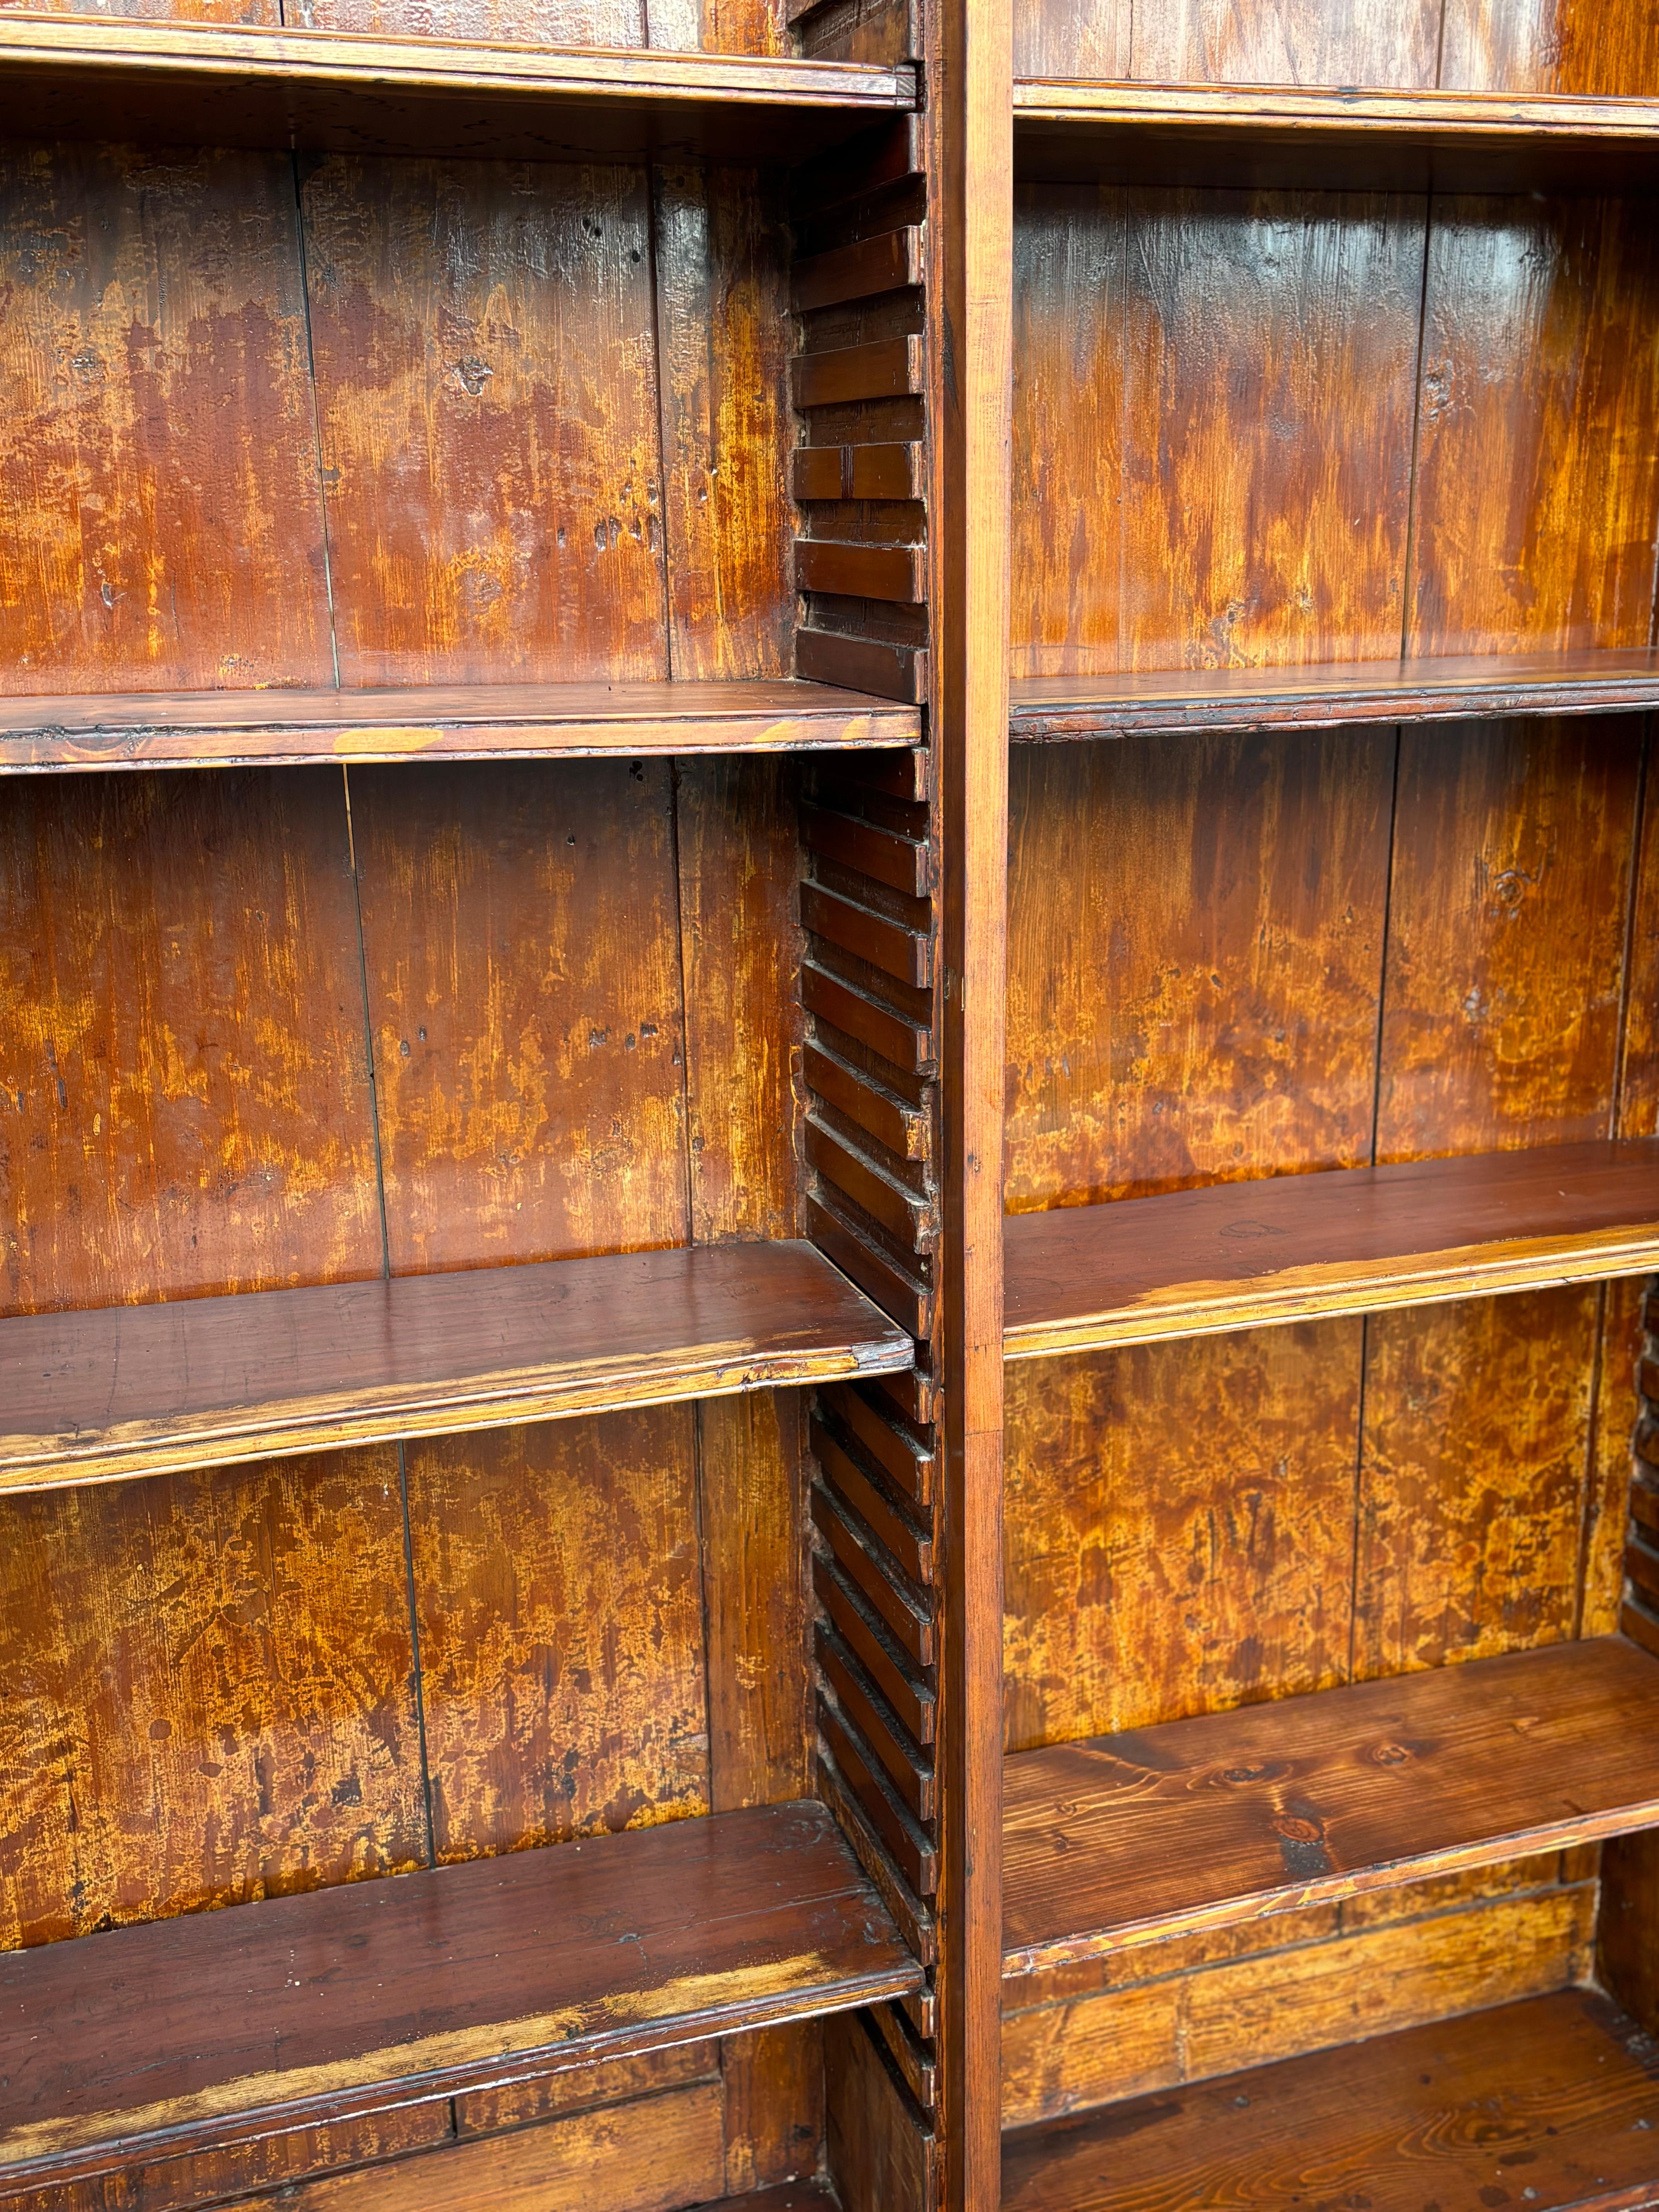 19th Century Country House Pine Display Bookcase In Good Condition For Sale In Petworth,West Sussex, GB